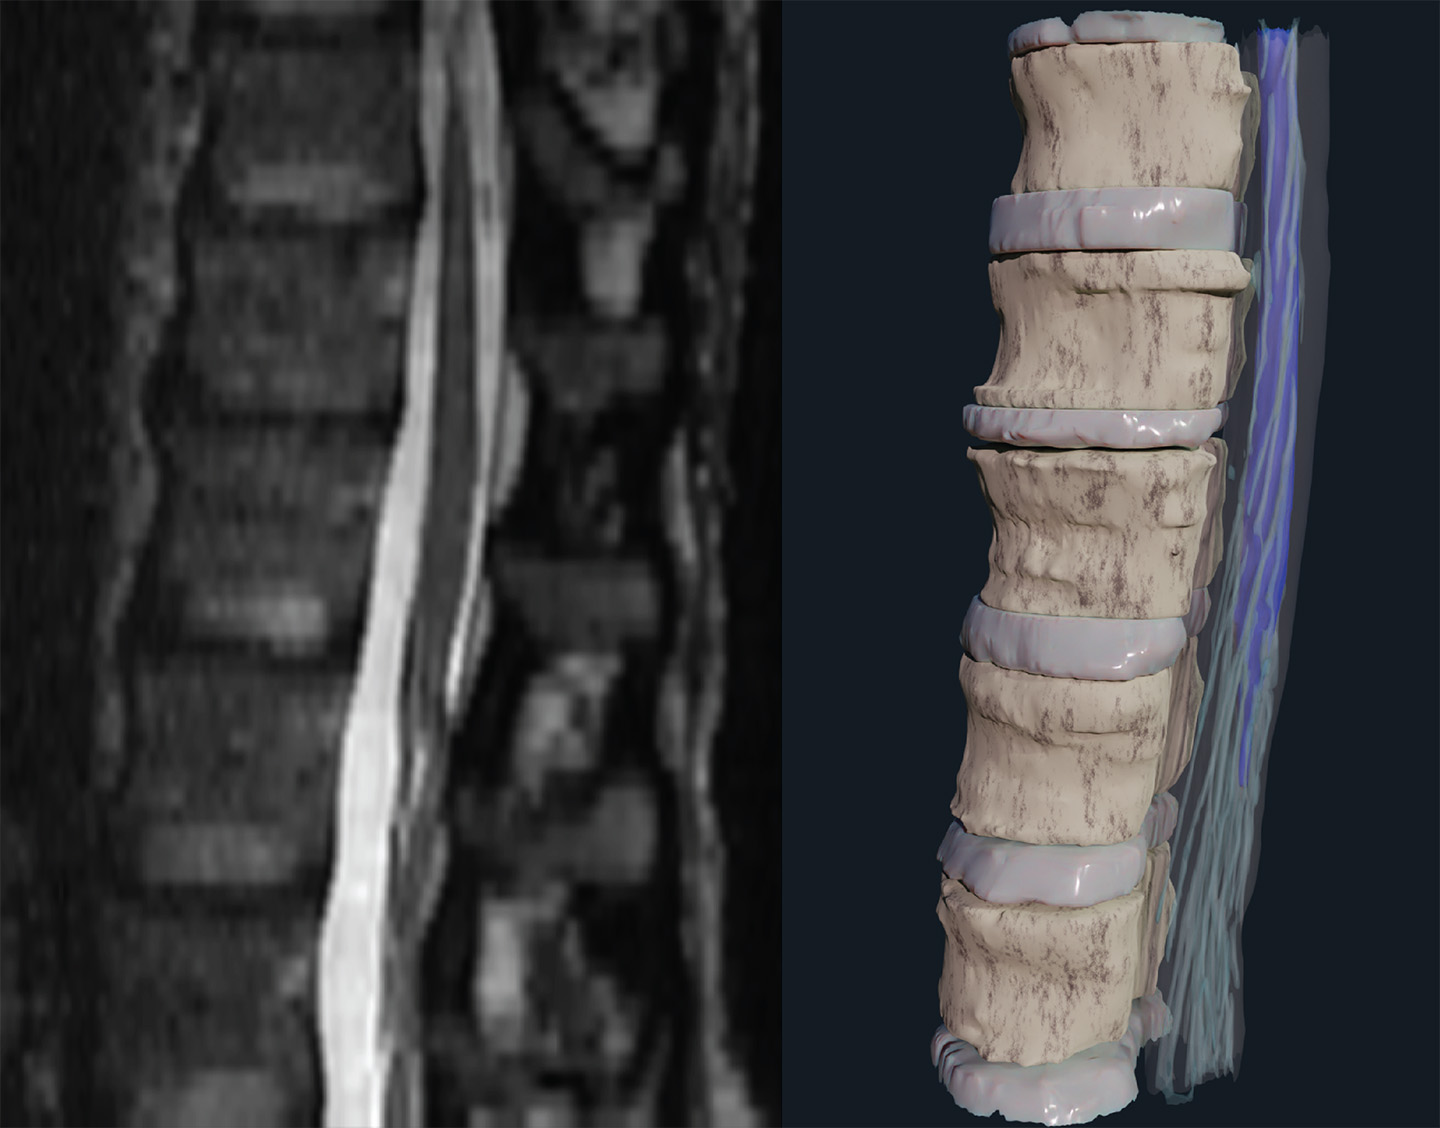 An APL team developed a pipeline for converting 2D MRI imagery (left) into 3D visualizations (right) to help surgeons place implants that help restore motor control to people with spinal cord injuries.